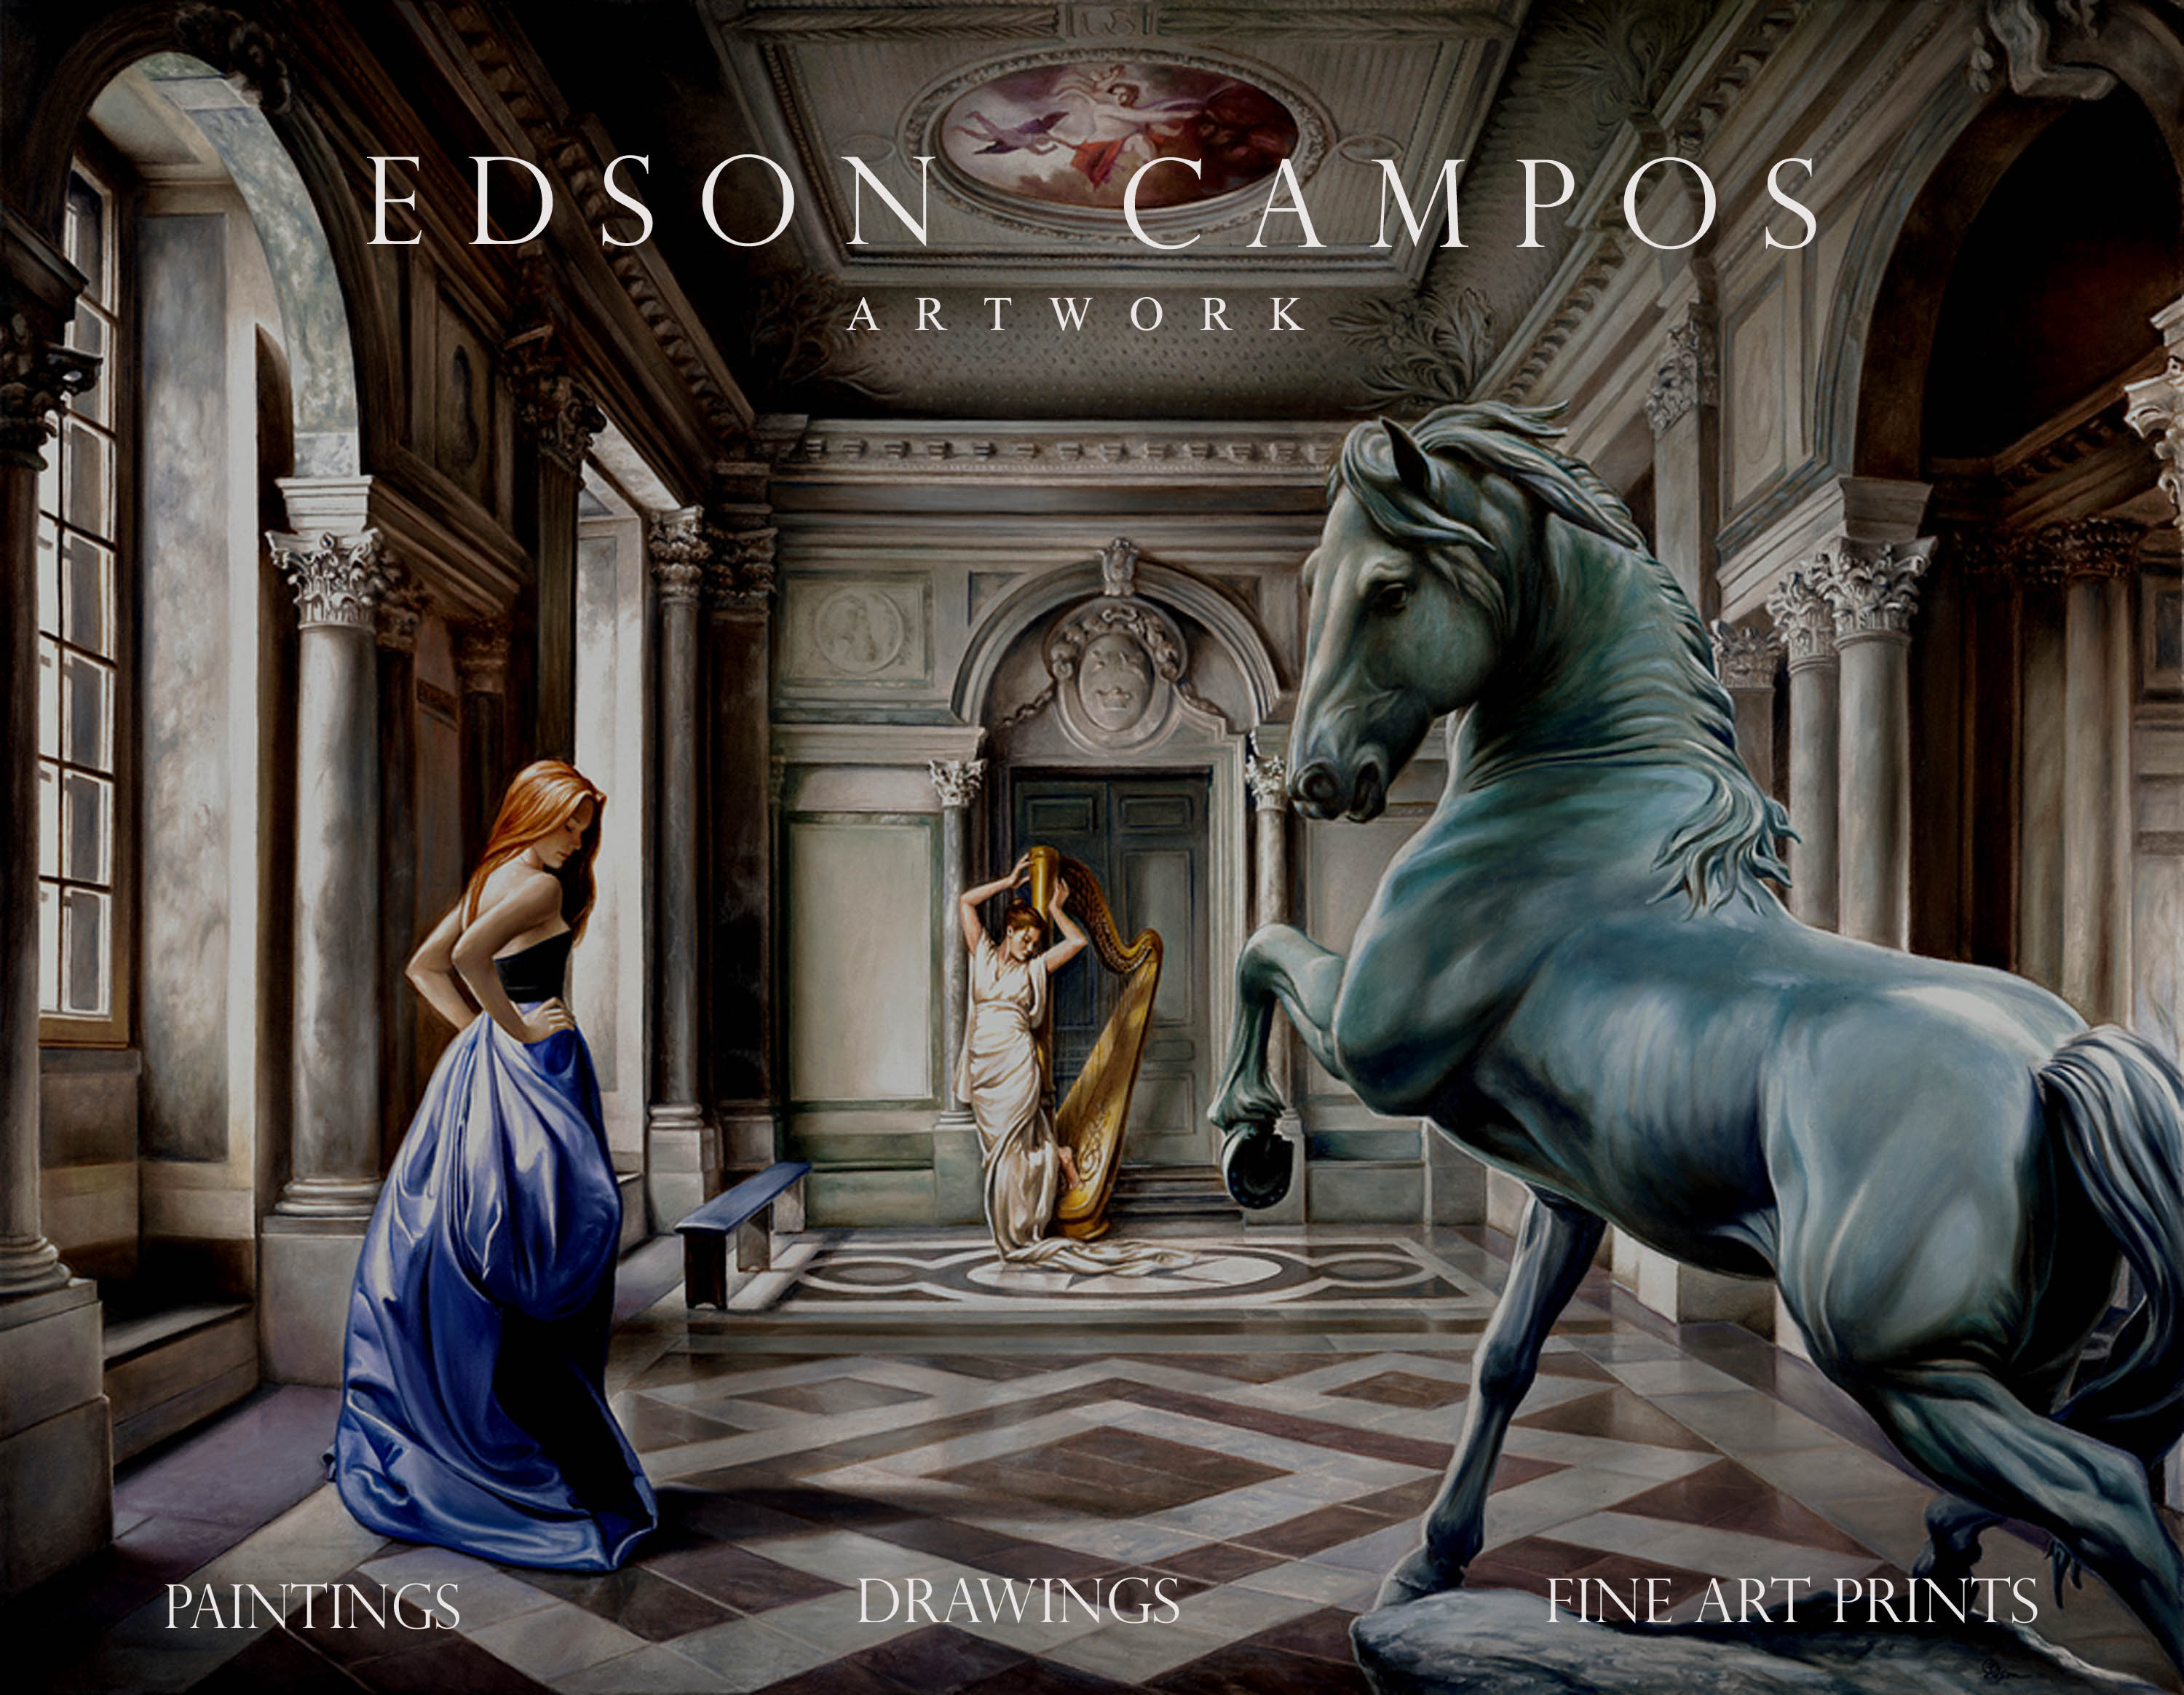 Edson Campos artist welcome to the official website